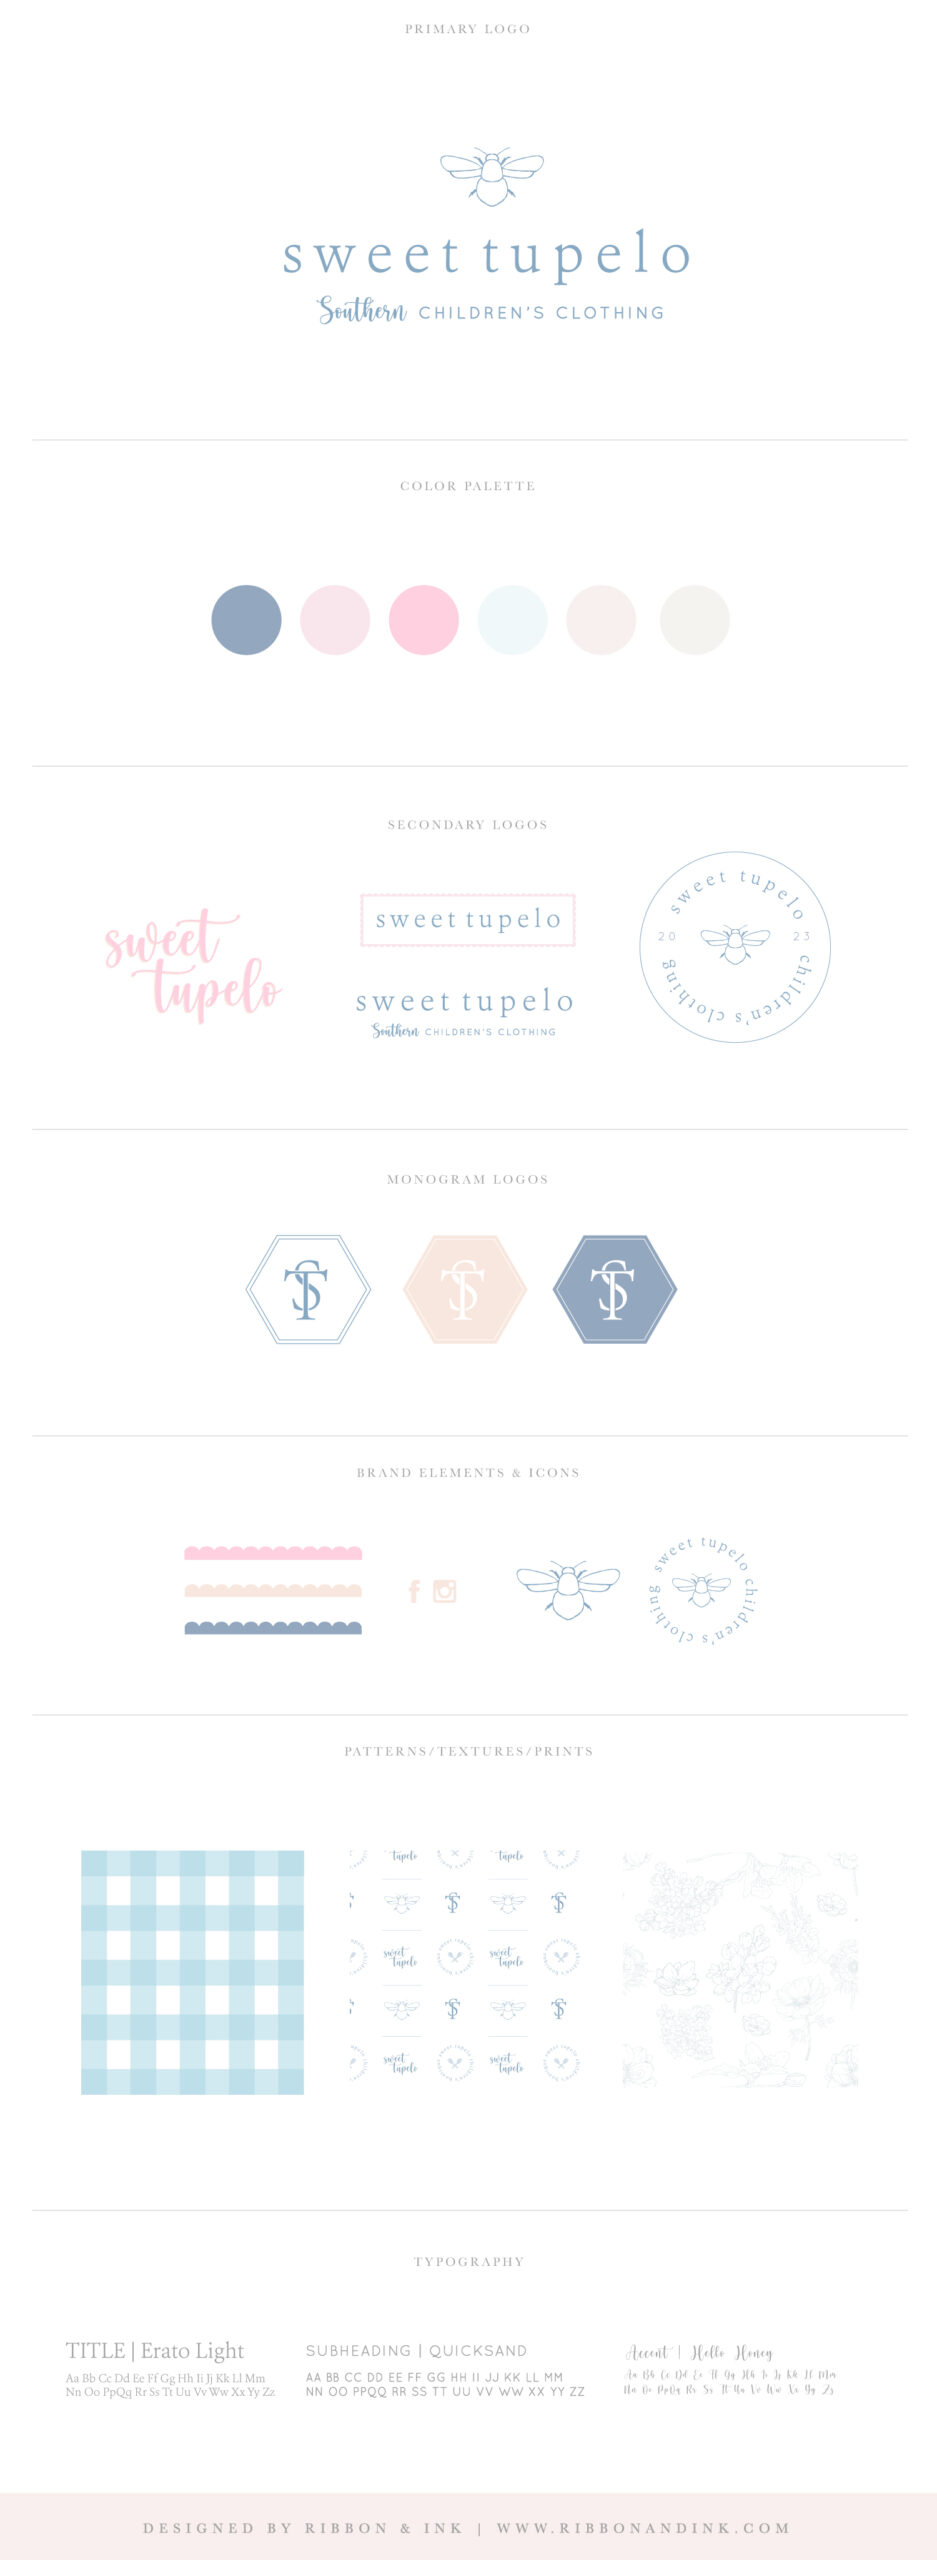 shop logo / childrens boutique branding / southern preppy branding / gingham / branding for creatives and small businesses